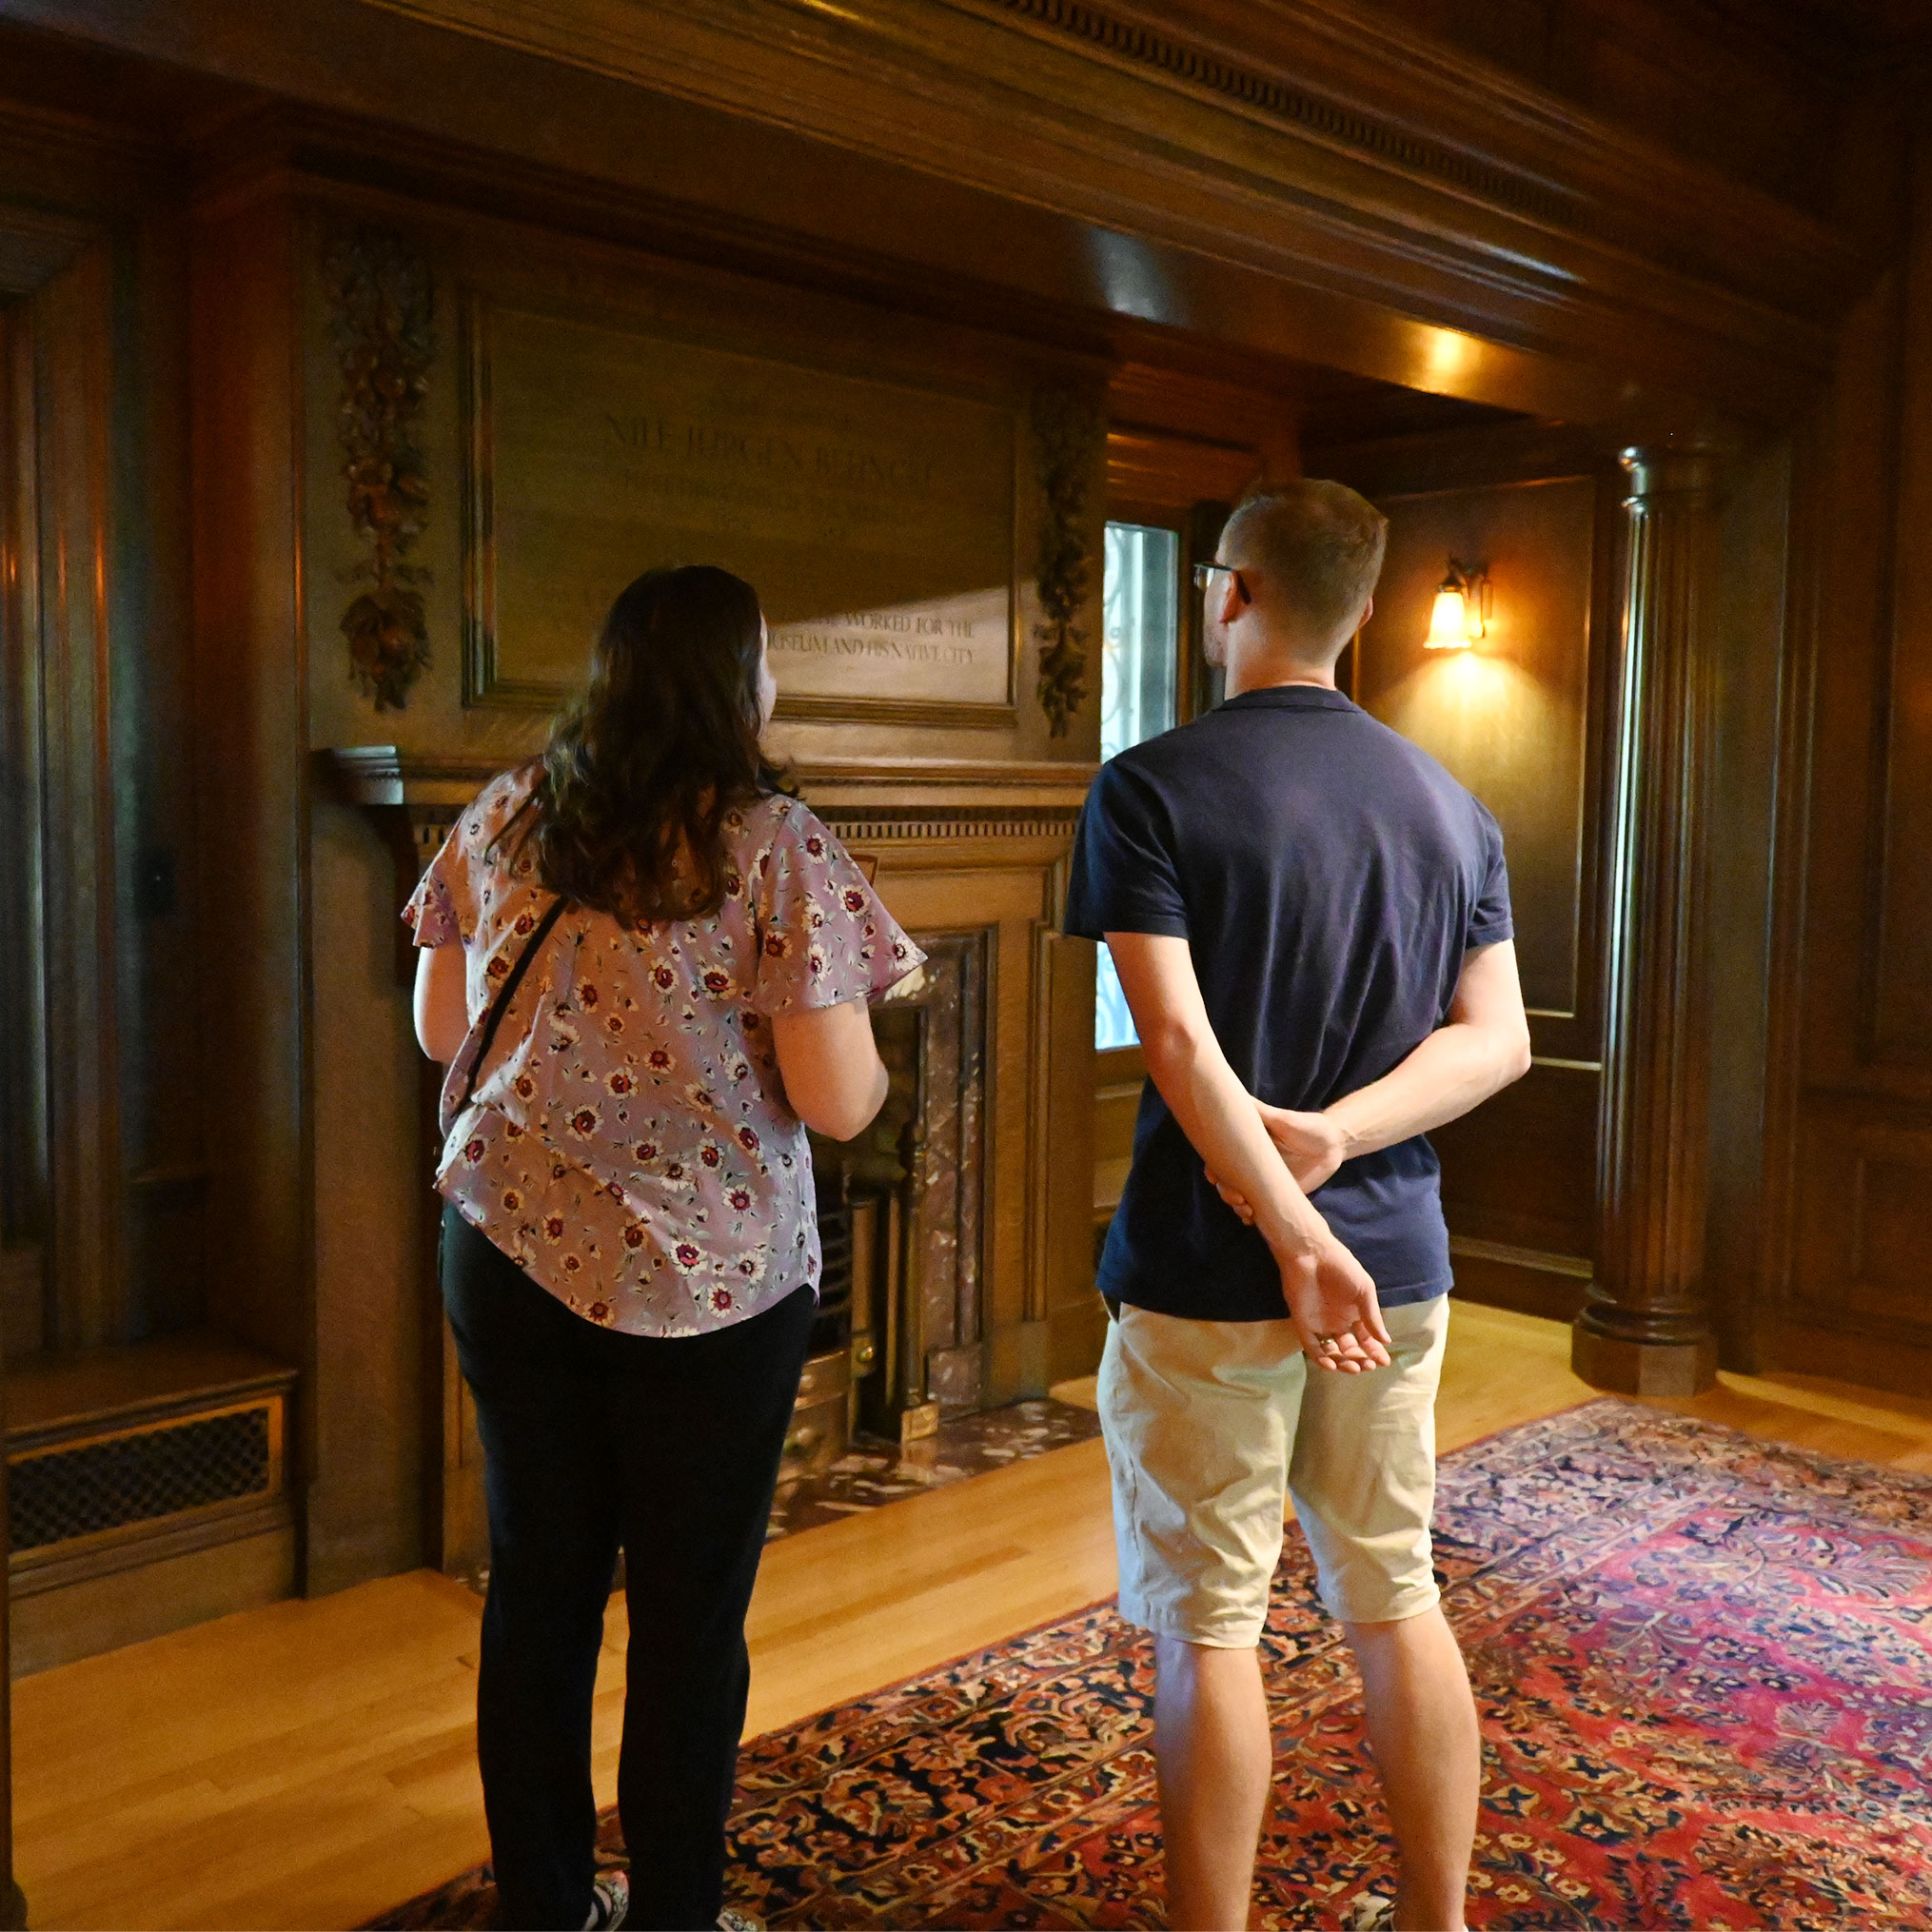 Visitors in the Historic Sawyer Home grand hall